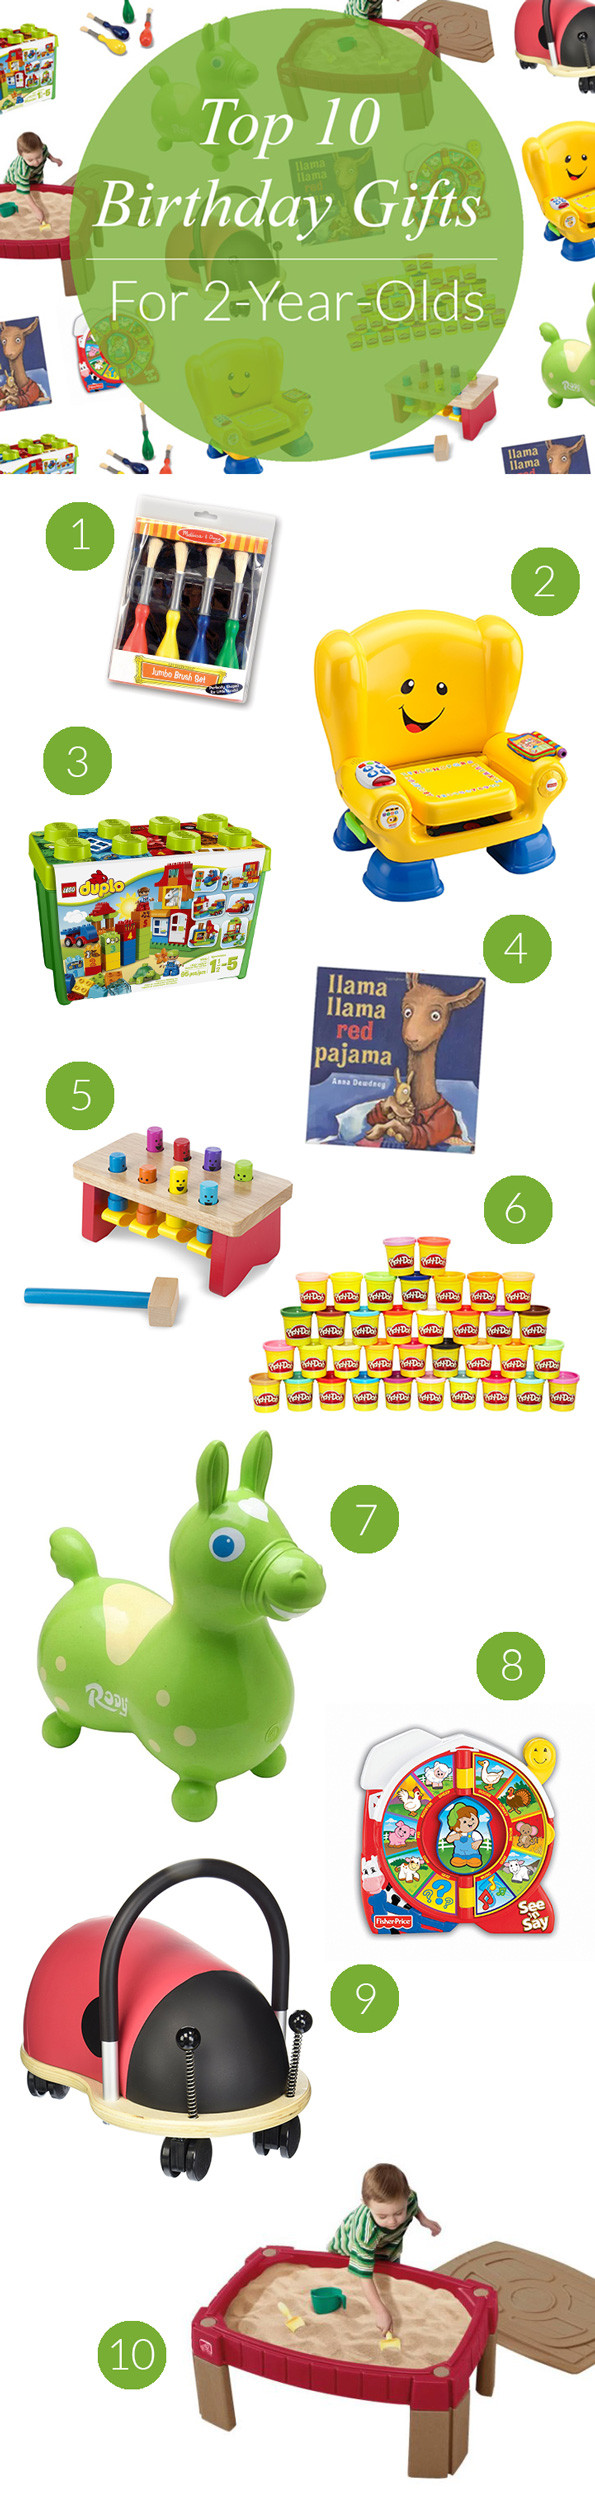 Birthday Gifts For 10 Year Olds
 Top 10 Birthday Gifts for 2 Year Olds Evite